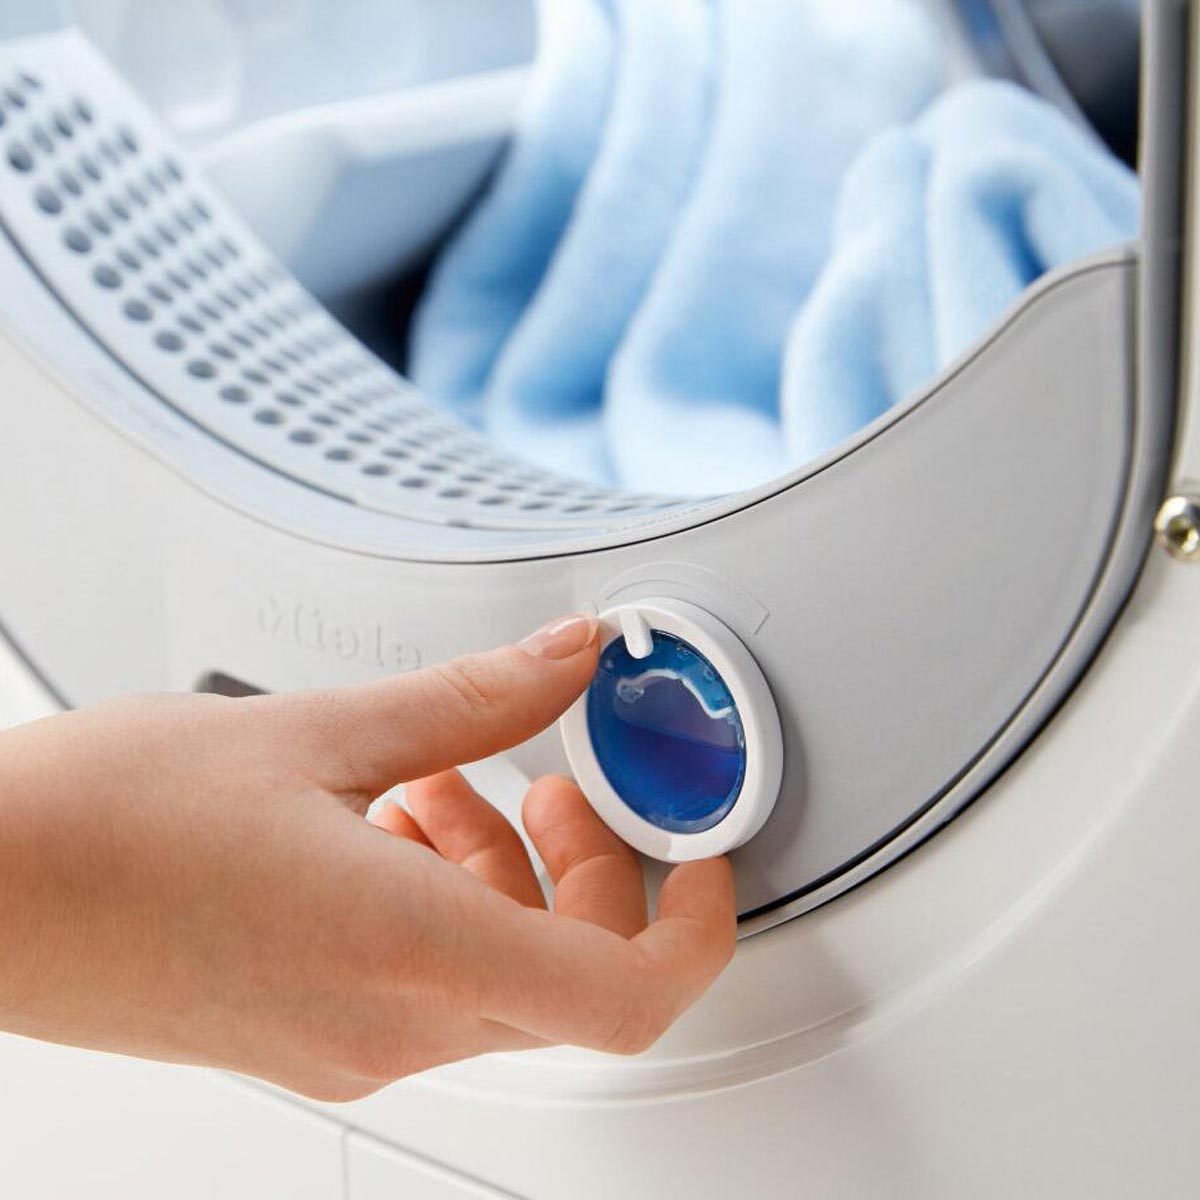 How hot does a dryer get? Too hot for most - Reviewed